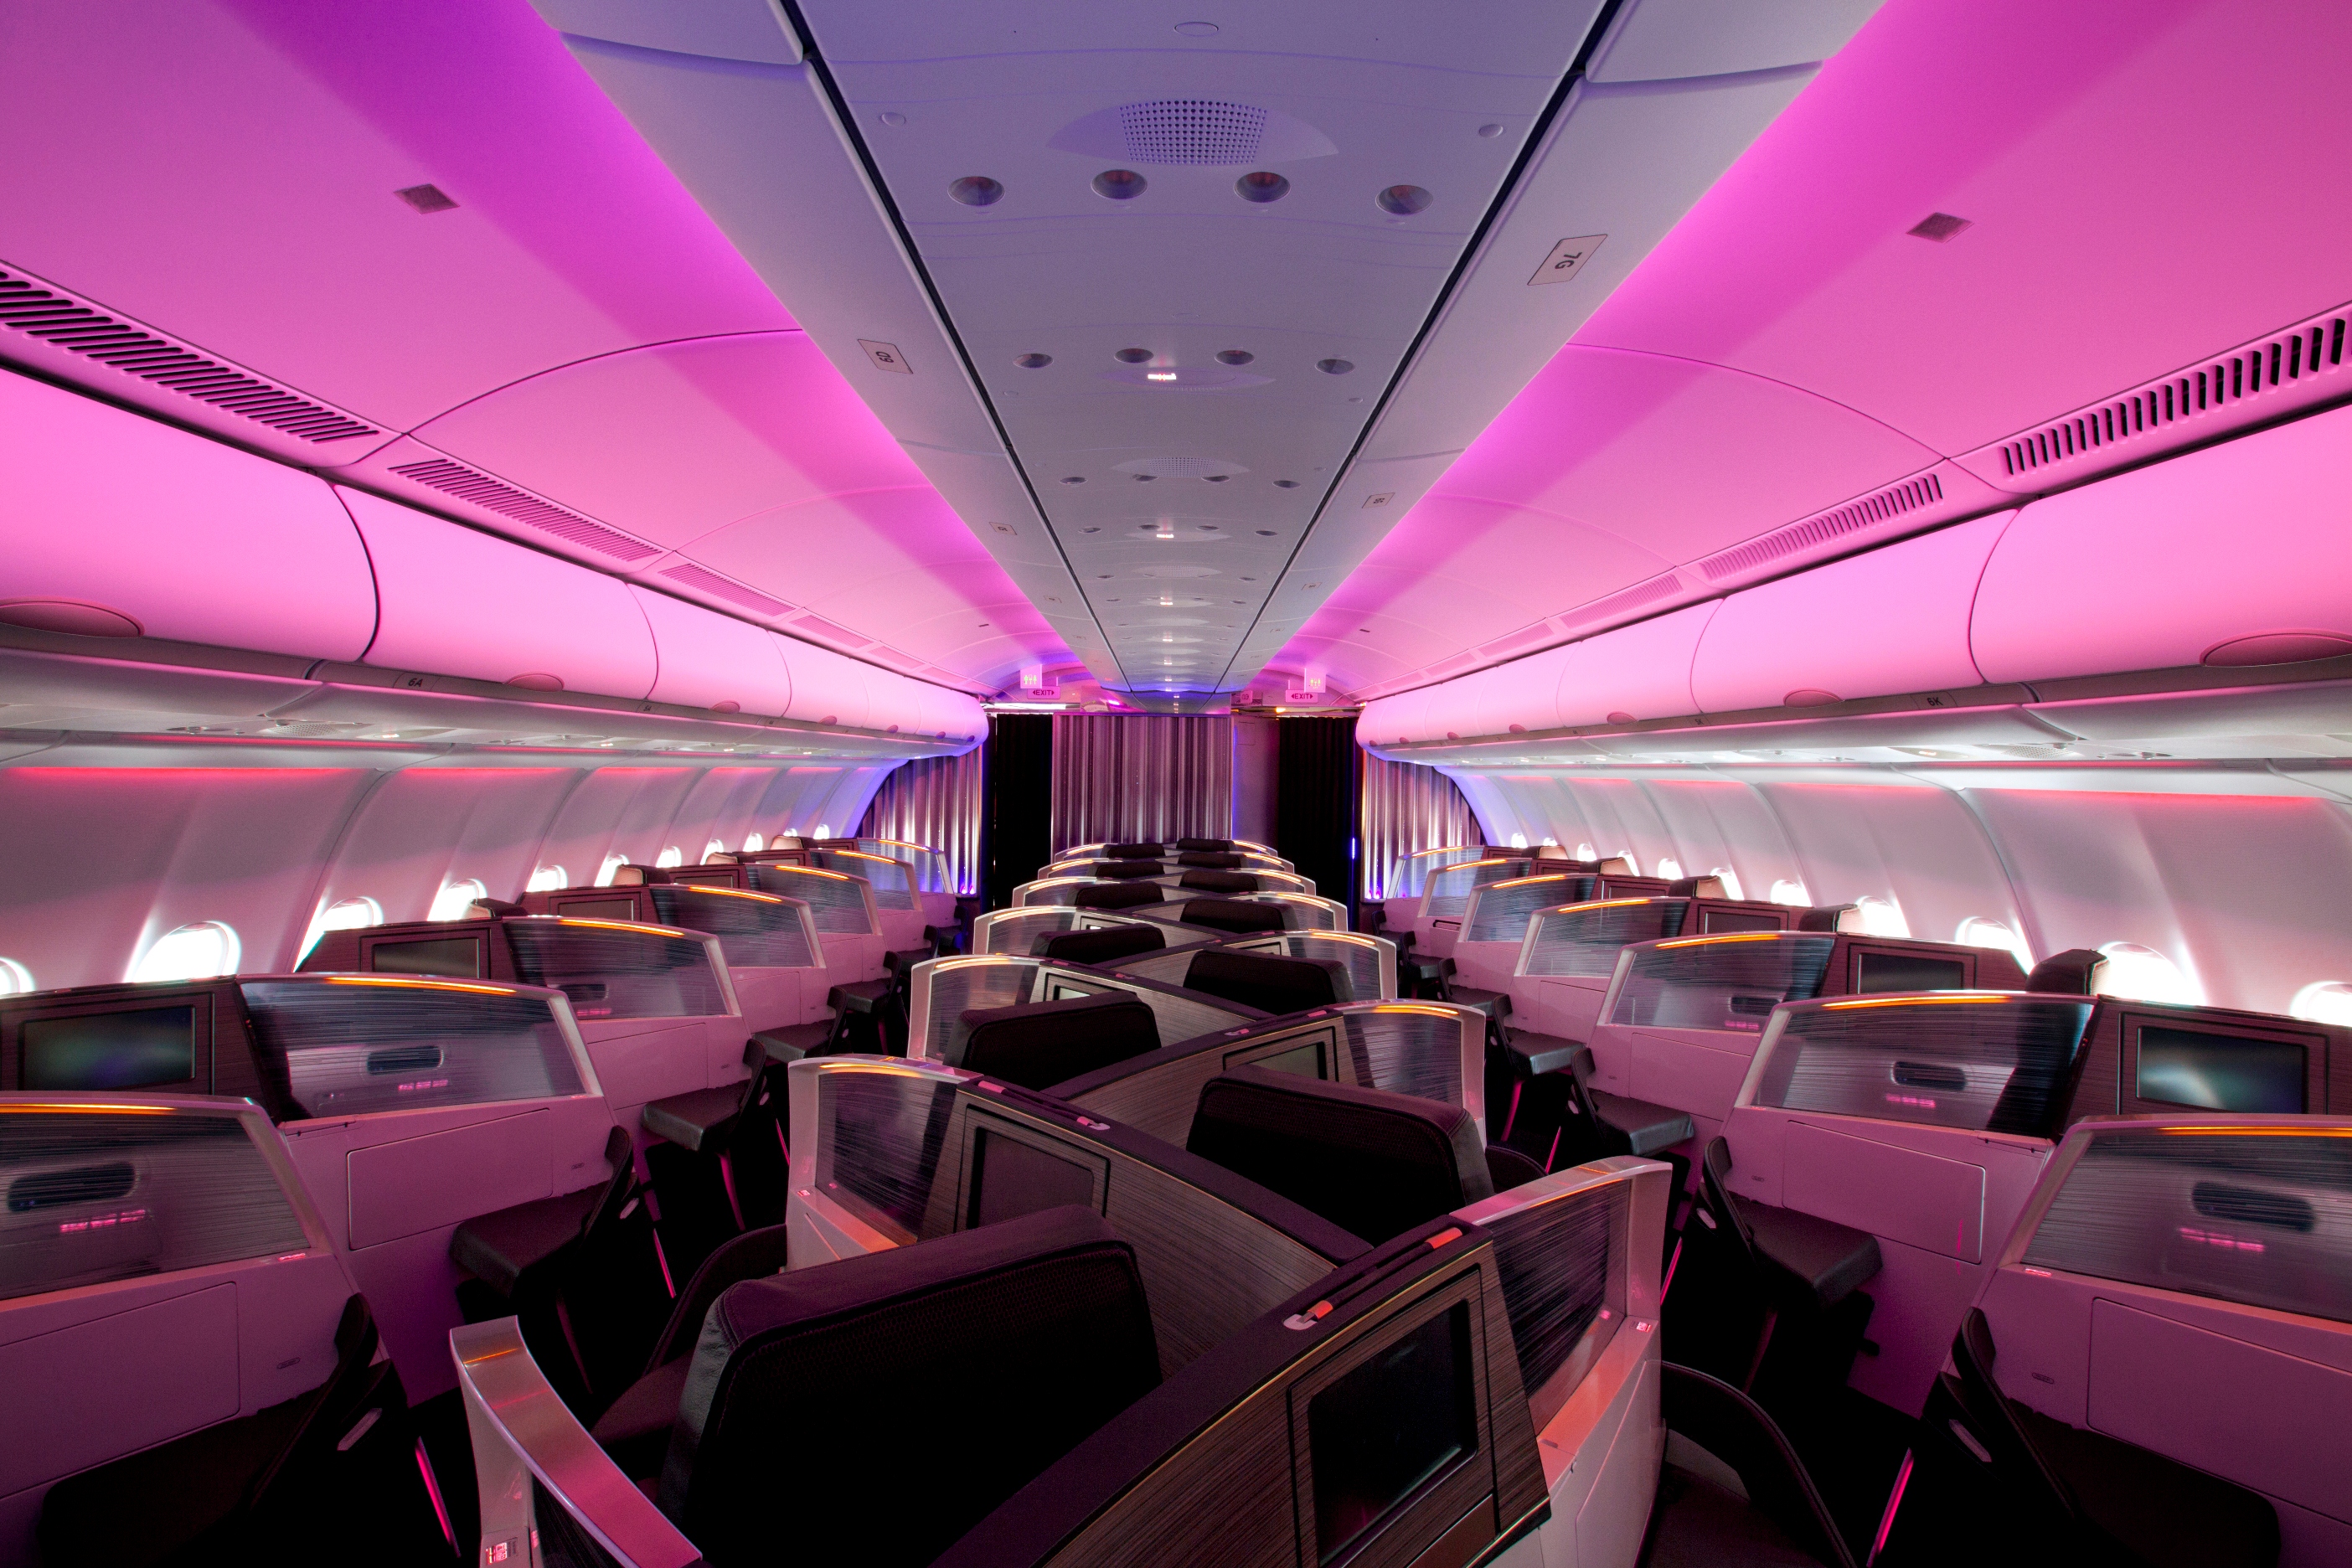 Virgin Atlantic 'Love Suite' Takes Flying to a New Level | Fortune